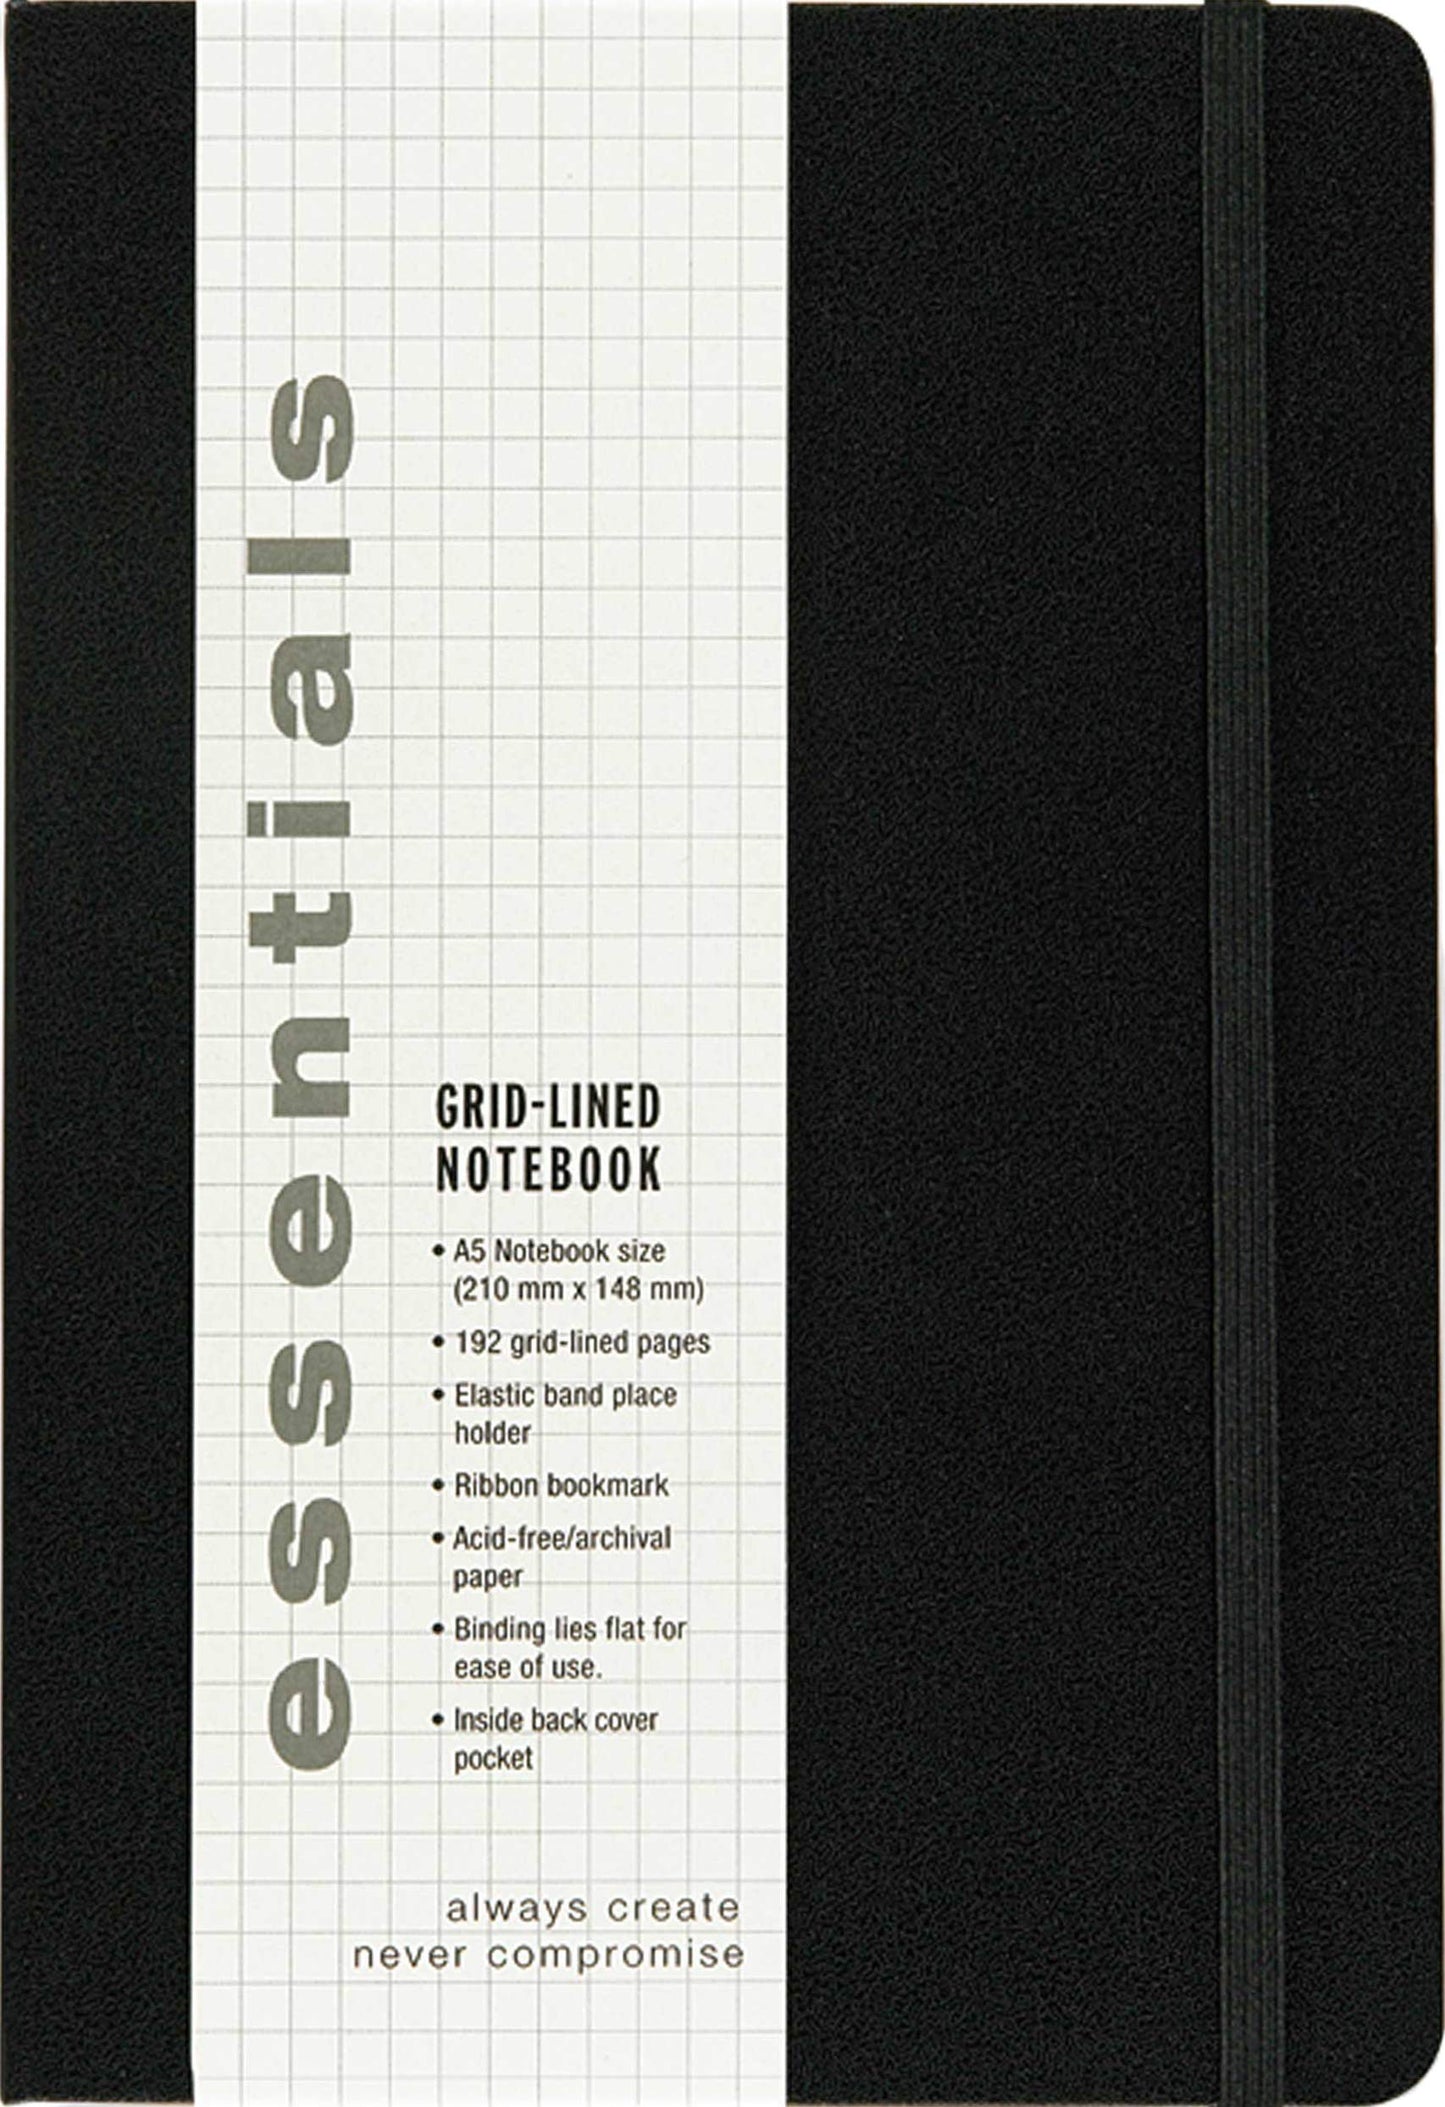 Essentials Grid-lined Notebook, Large, A5 Size (Journal, Diary)